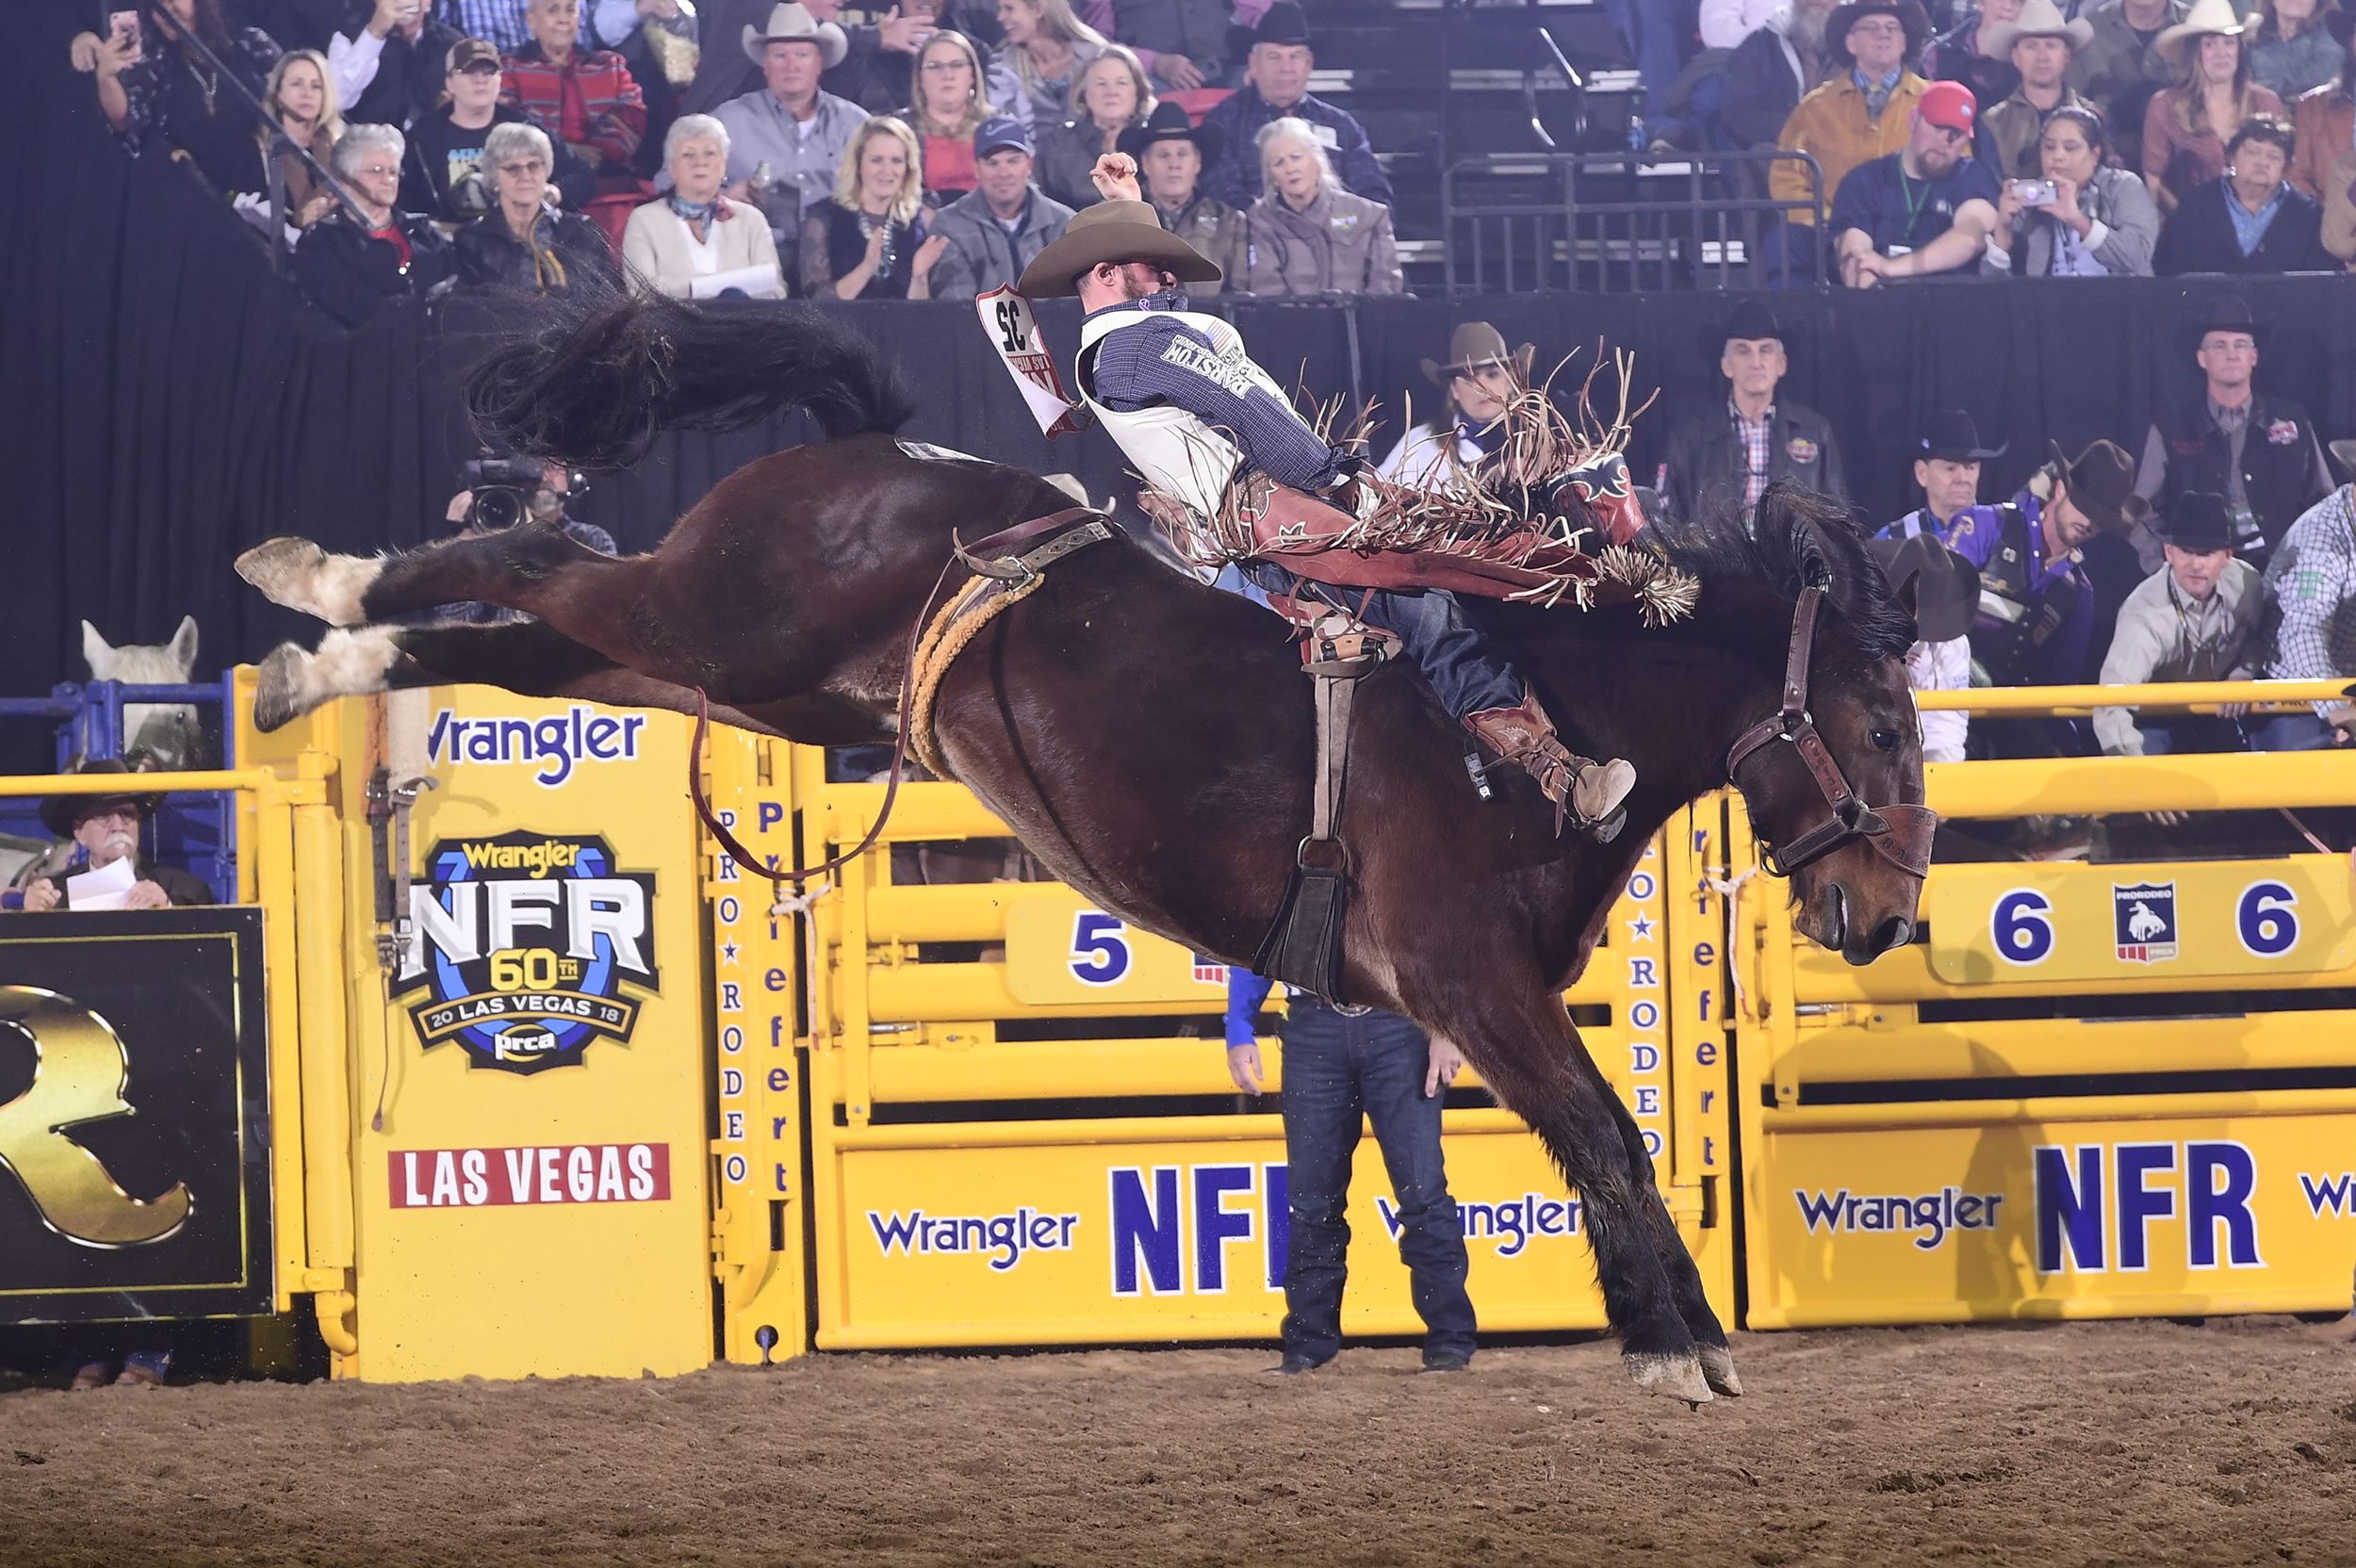 Mason Clements spurs Frontier Rodeo's Full Baggage for 88.5 points Thursday night to finish as runner-up in the eighth round of the National Finals Rodeo. (PRCA PRORODEO PHOTO BY JAMES PHIFER)